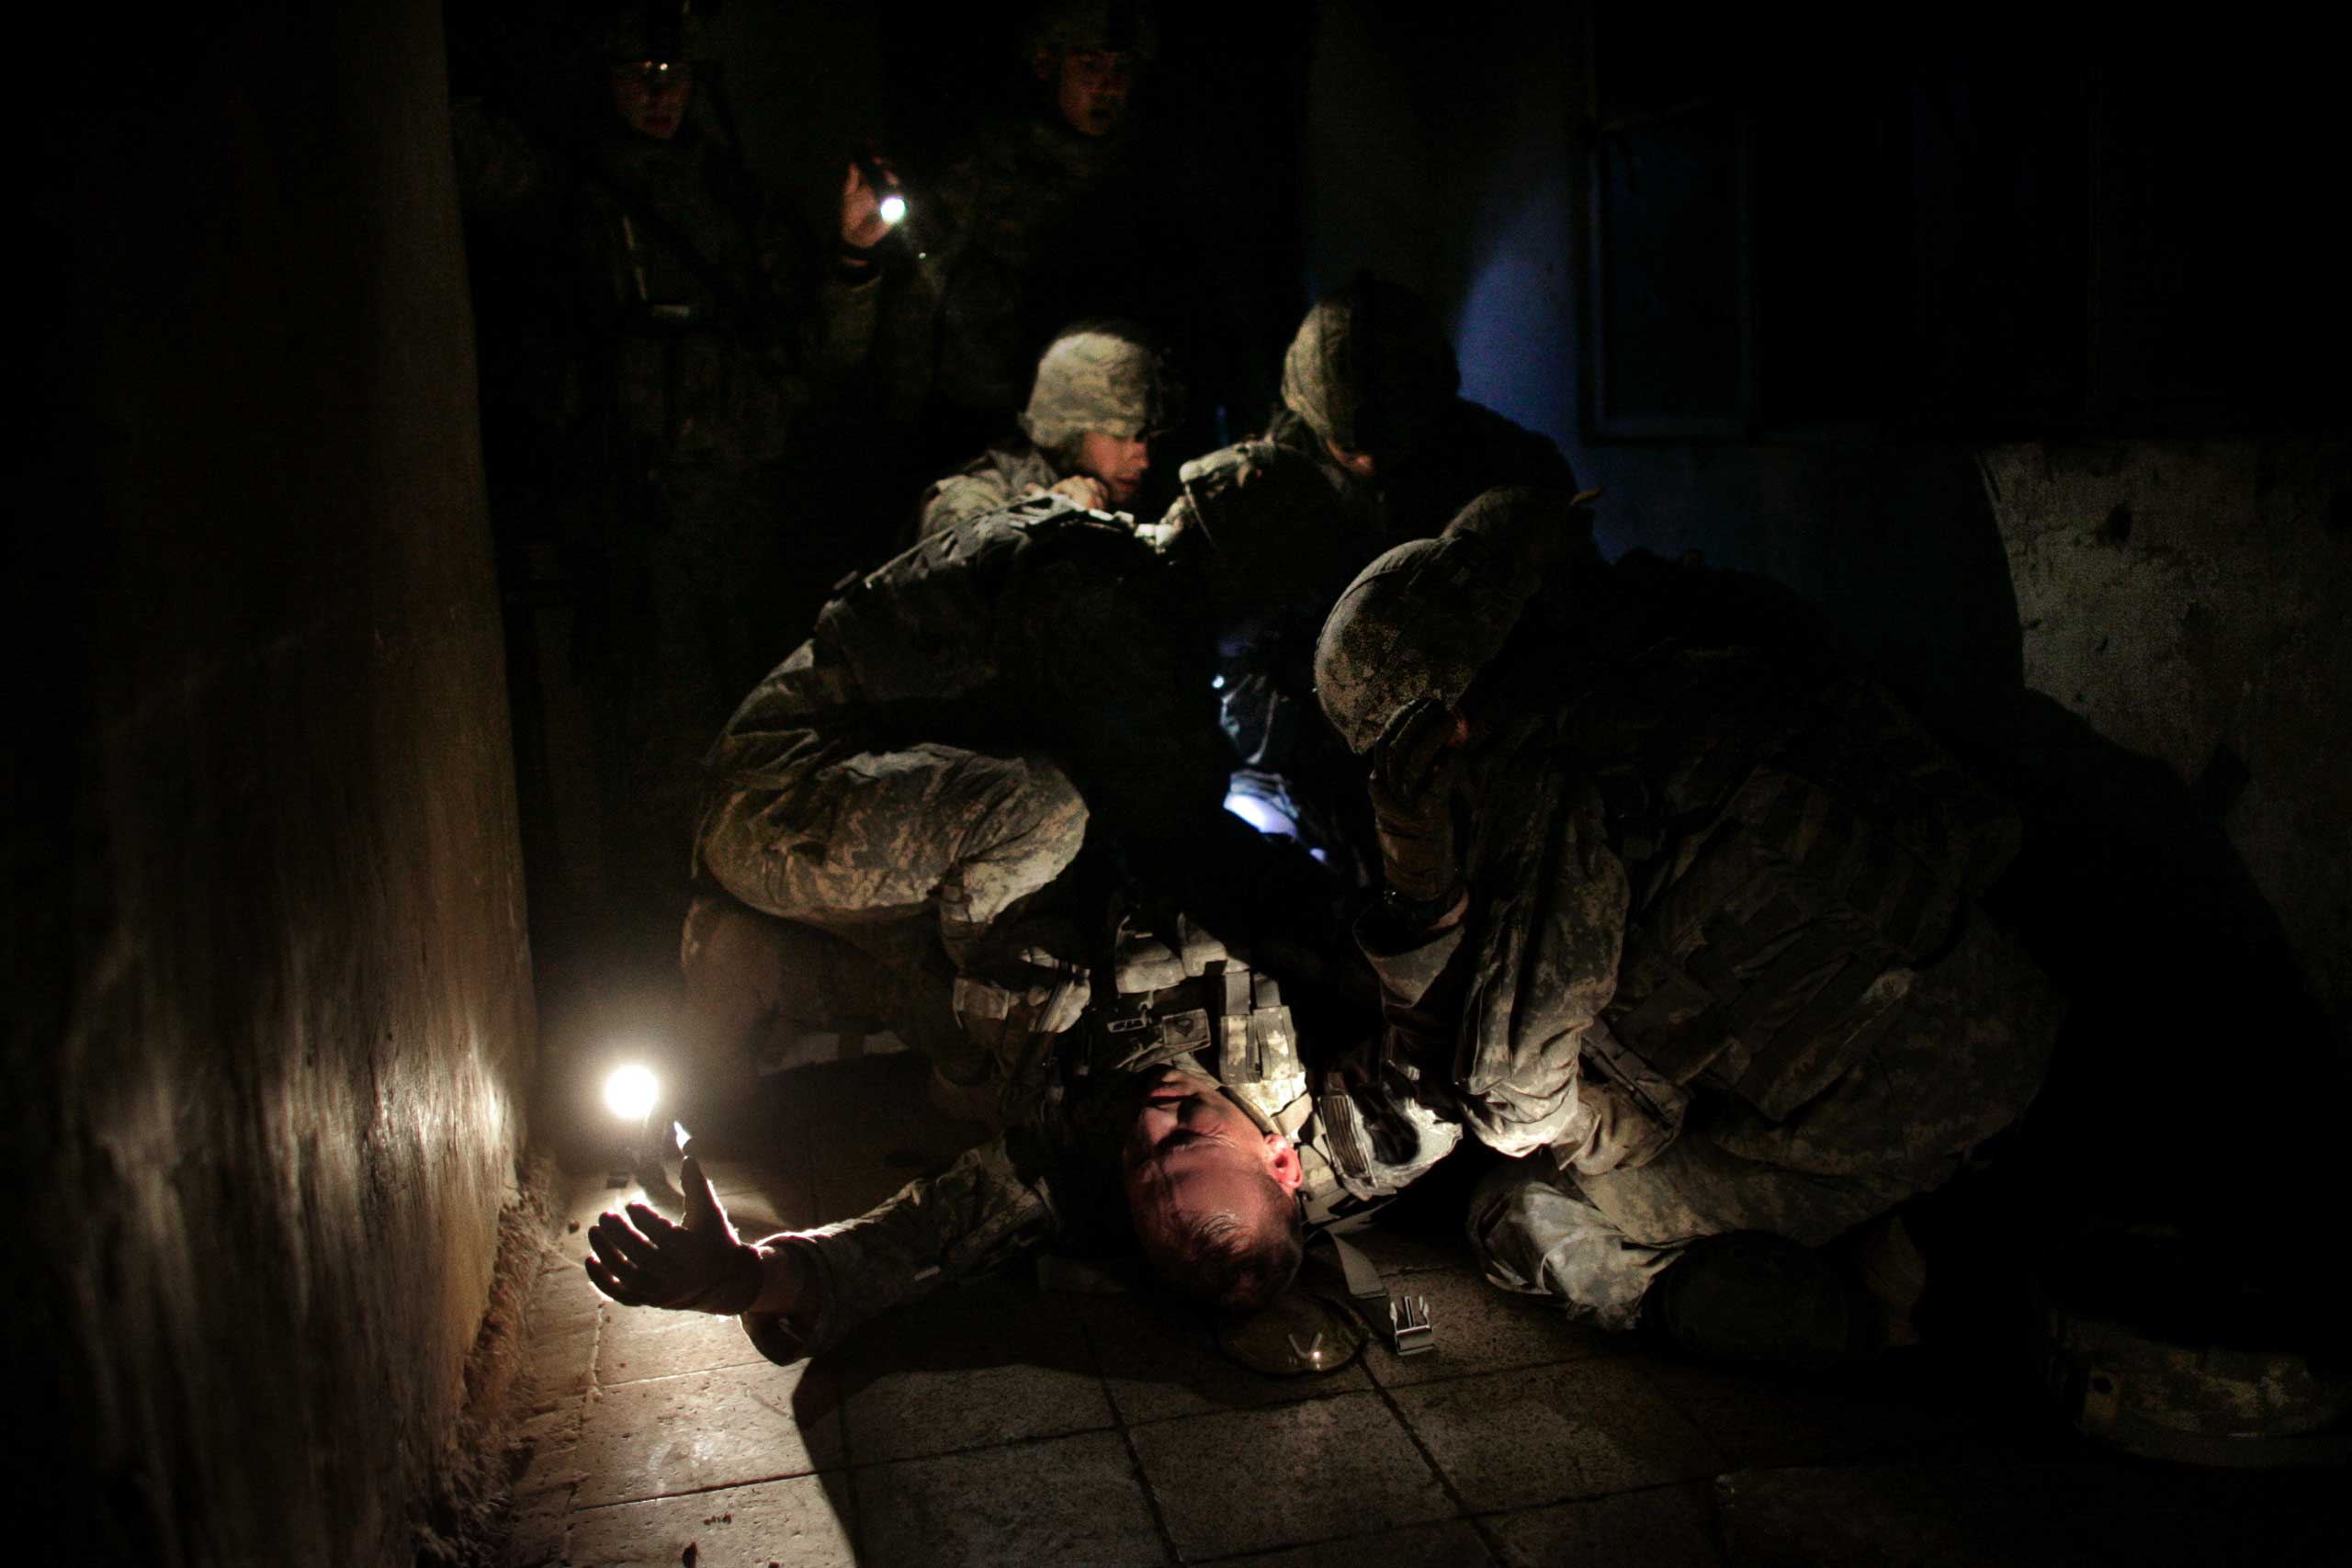 Staff Sergeant David Brown.
                              David Furst,
                              March 22, 2007. Baghdad, Iraq.
                              
                               U.S. soldiers provide first aid to Staff Sergeant David Brown on March 22, 2007. Brown was shot in the leg while securing the area around a weapons cache found on patrol in the Dora neighborhood of southern Baghdad.
                              
                              When I see this image, I’m instantly transported back in time. I was a young photographer with Agence France-Presse when gunmen unexpectedly opened fire on the unit I was embedded with. Suddenly I felt someone grab me by the back of my flak jacket and hurl me into a doorway toward the cover of a concrete wall. Brown fell on top of me as a bullet hit him in the thigh. The stranger who saved my life was now bleeding heavily.
                              
                              Brown eventually recovered from his wounds and returned to Iraq. But his lighting quick actions that day reflected a professionalism as well as an instinct to protect others. It didn’t matter that I wasn’t in uniform, and that he barely knew me: Brown’s first thought was to help the person beside him.